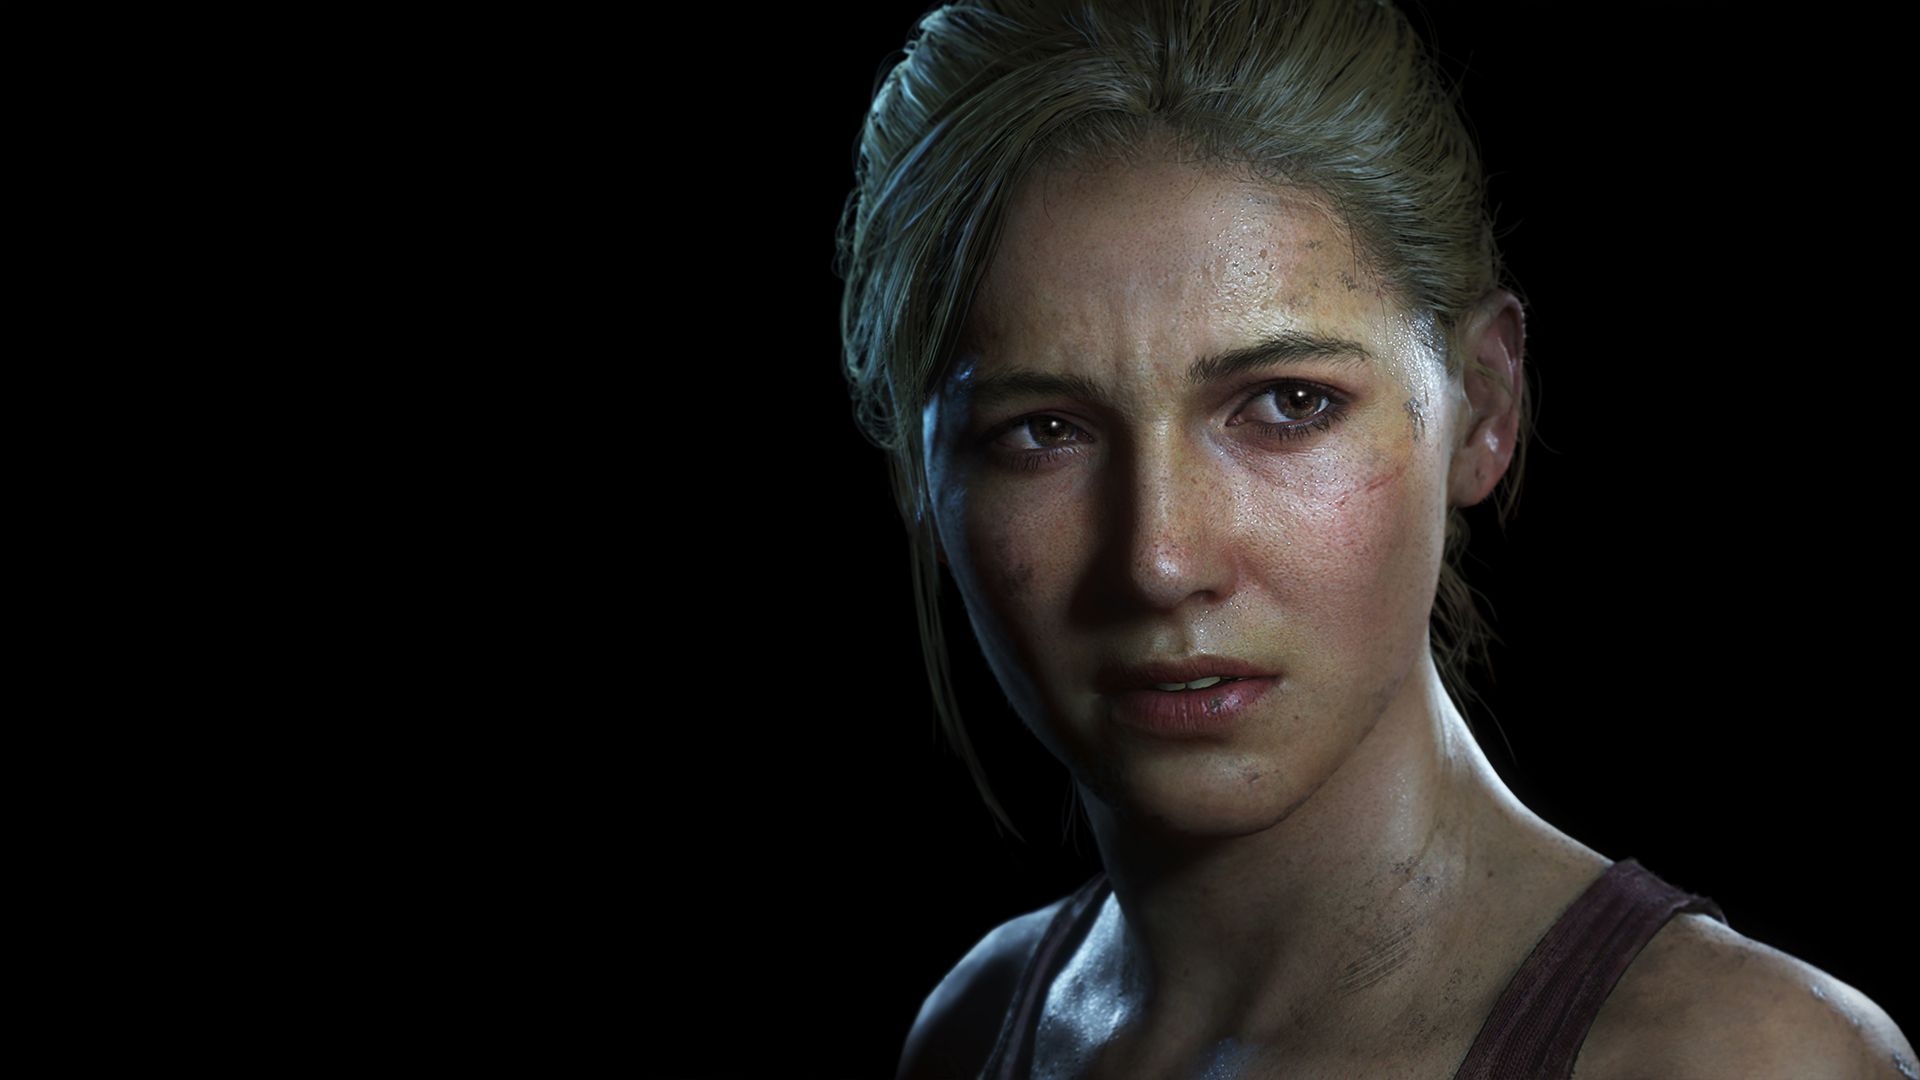 Wallpaper Uncharted 4: A Thief's End, Elena Fisher, video game, face